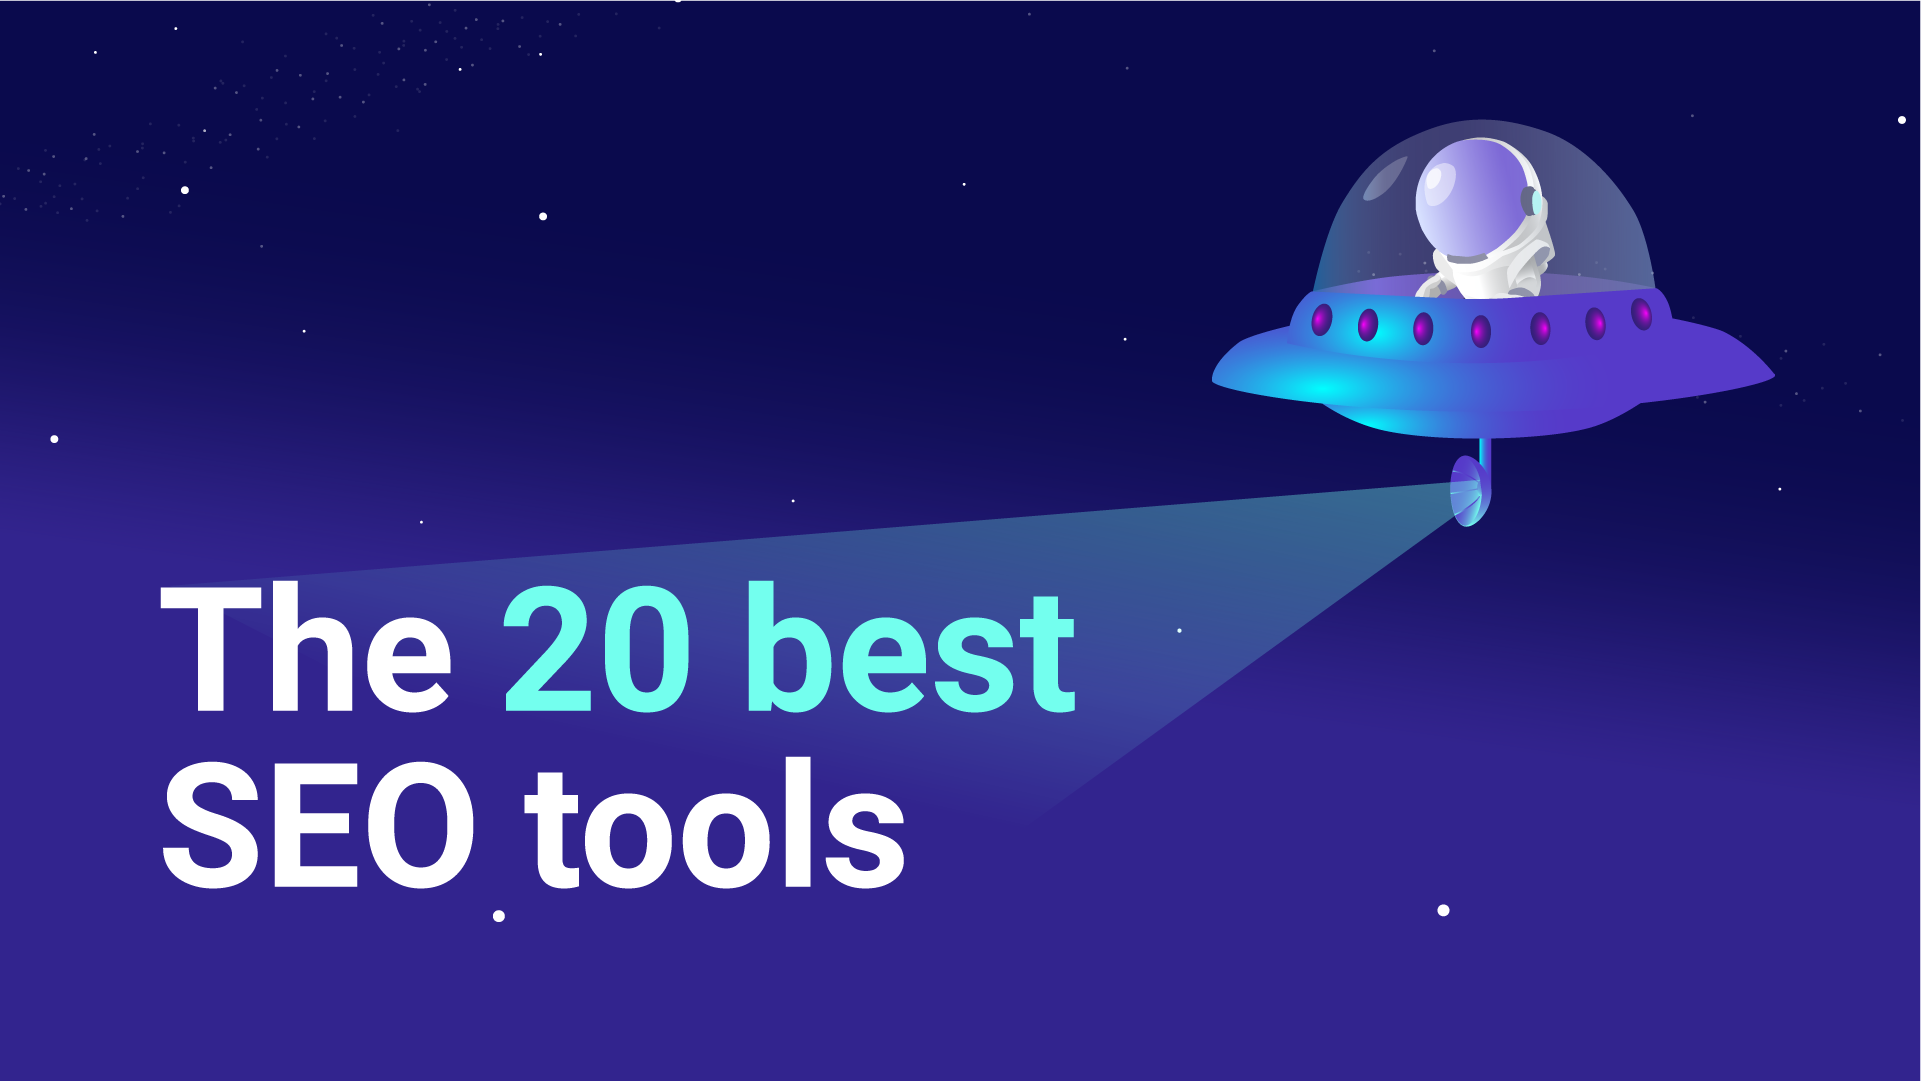 The 20 best SEO tools